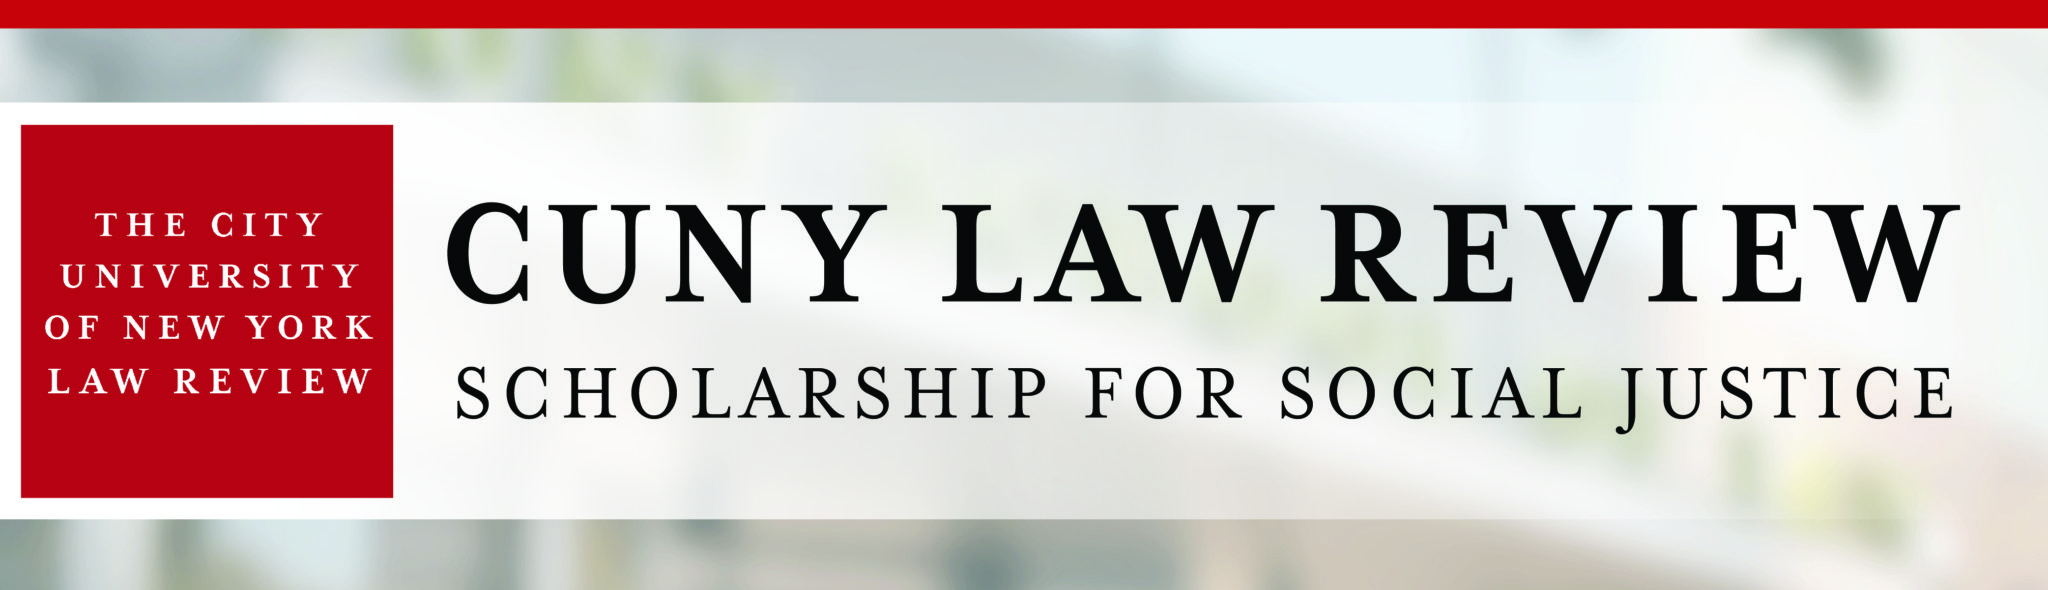 Submissions CUNY LAW REVIEWCUNY LAW REVIEW